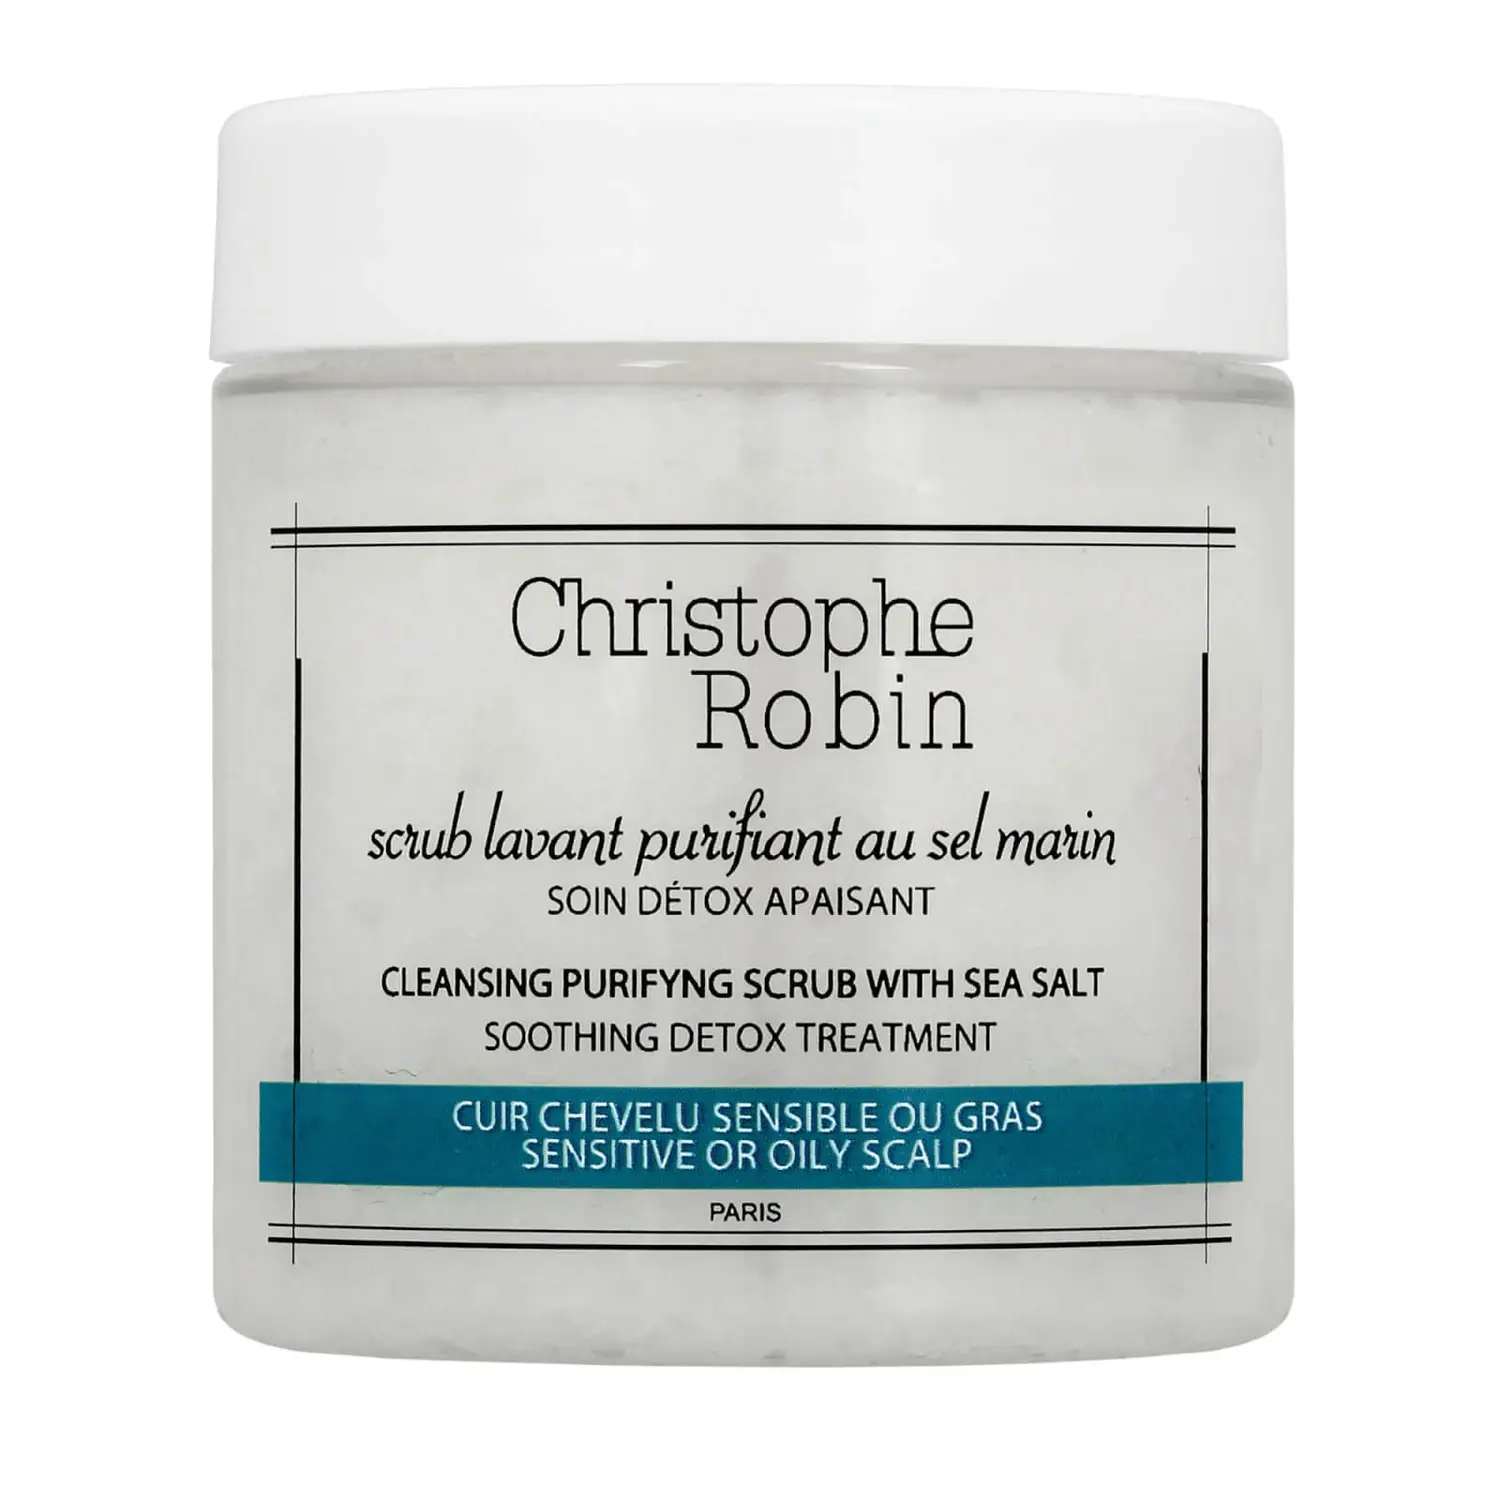 Christophe Robin Cleansing Purifying Scrub with Sea Salt 75ml | Free US Shipping | lookfantastic